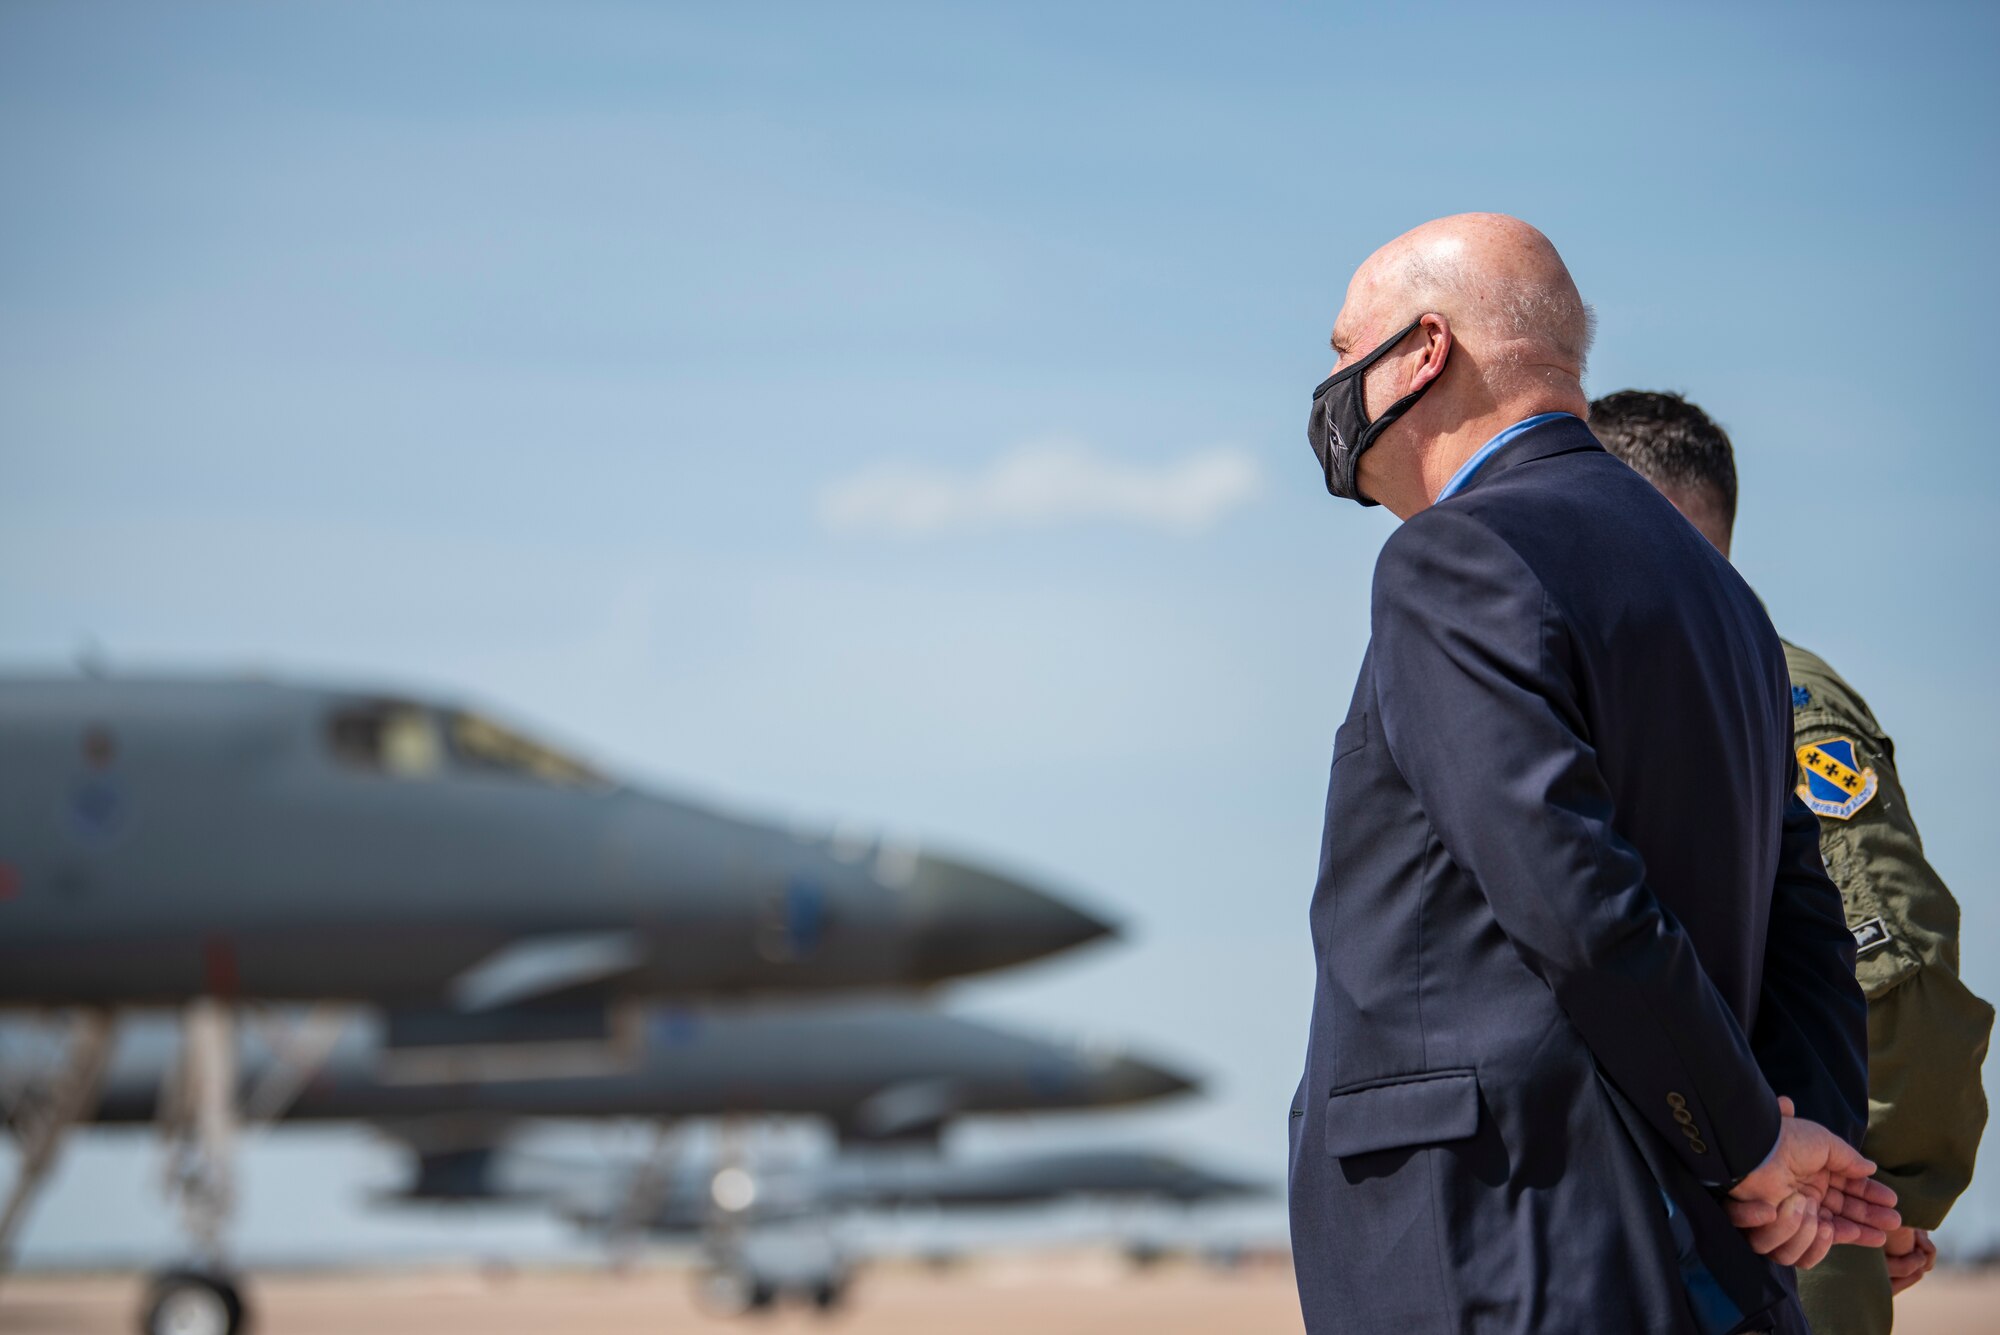 Acting Secretary of the Air Force John Roth observes a fleet of B-1B Lancer aircraft at Dyess Air Force Base, Texas, April 6, 2021. During the tour of Dyess AFB, Roth received briefings on the B-1s traditional combat capabilities, as well as the bombers more recent role in participating in strategic Bomber Task Force deployments. (U.S. Air Force photo by Airman 1st Class Colin Hollowell)